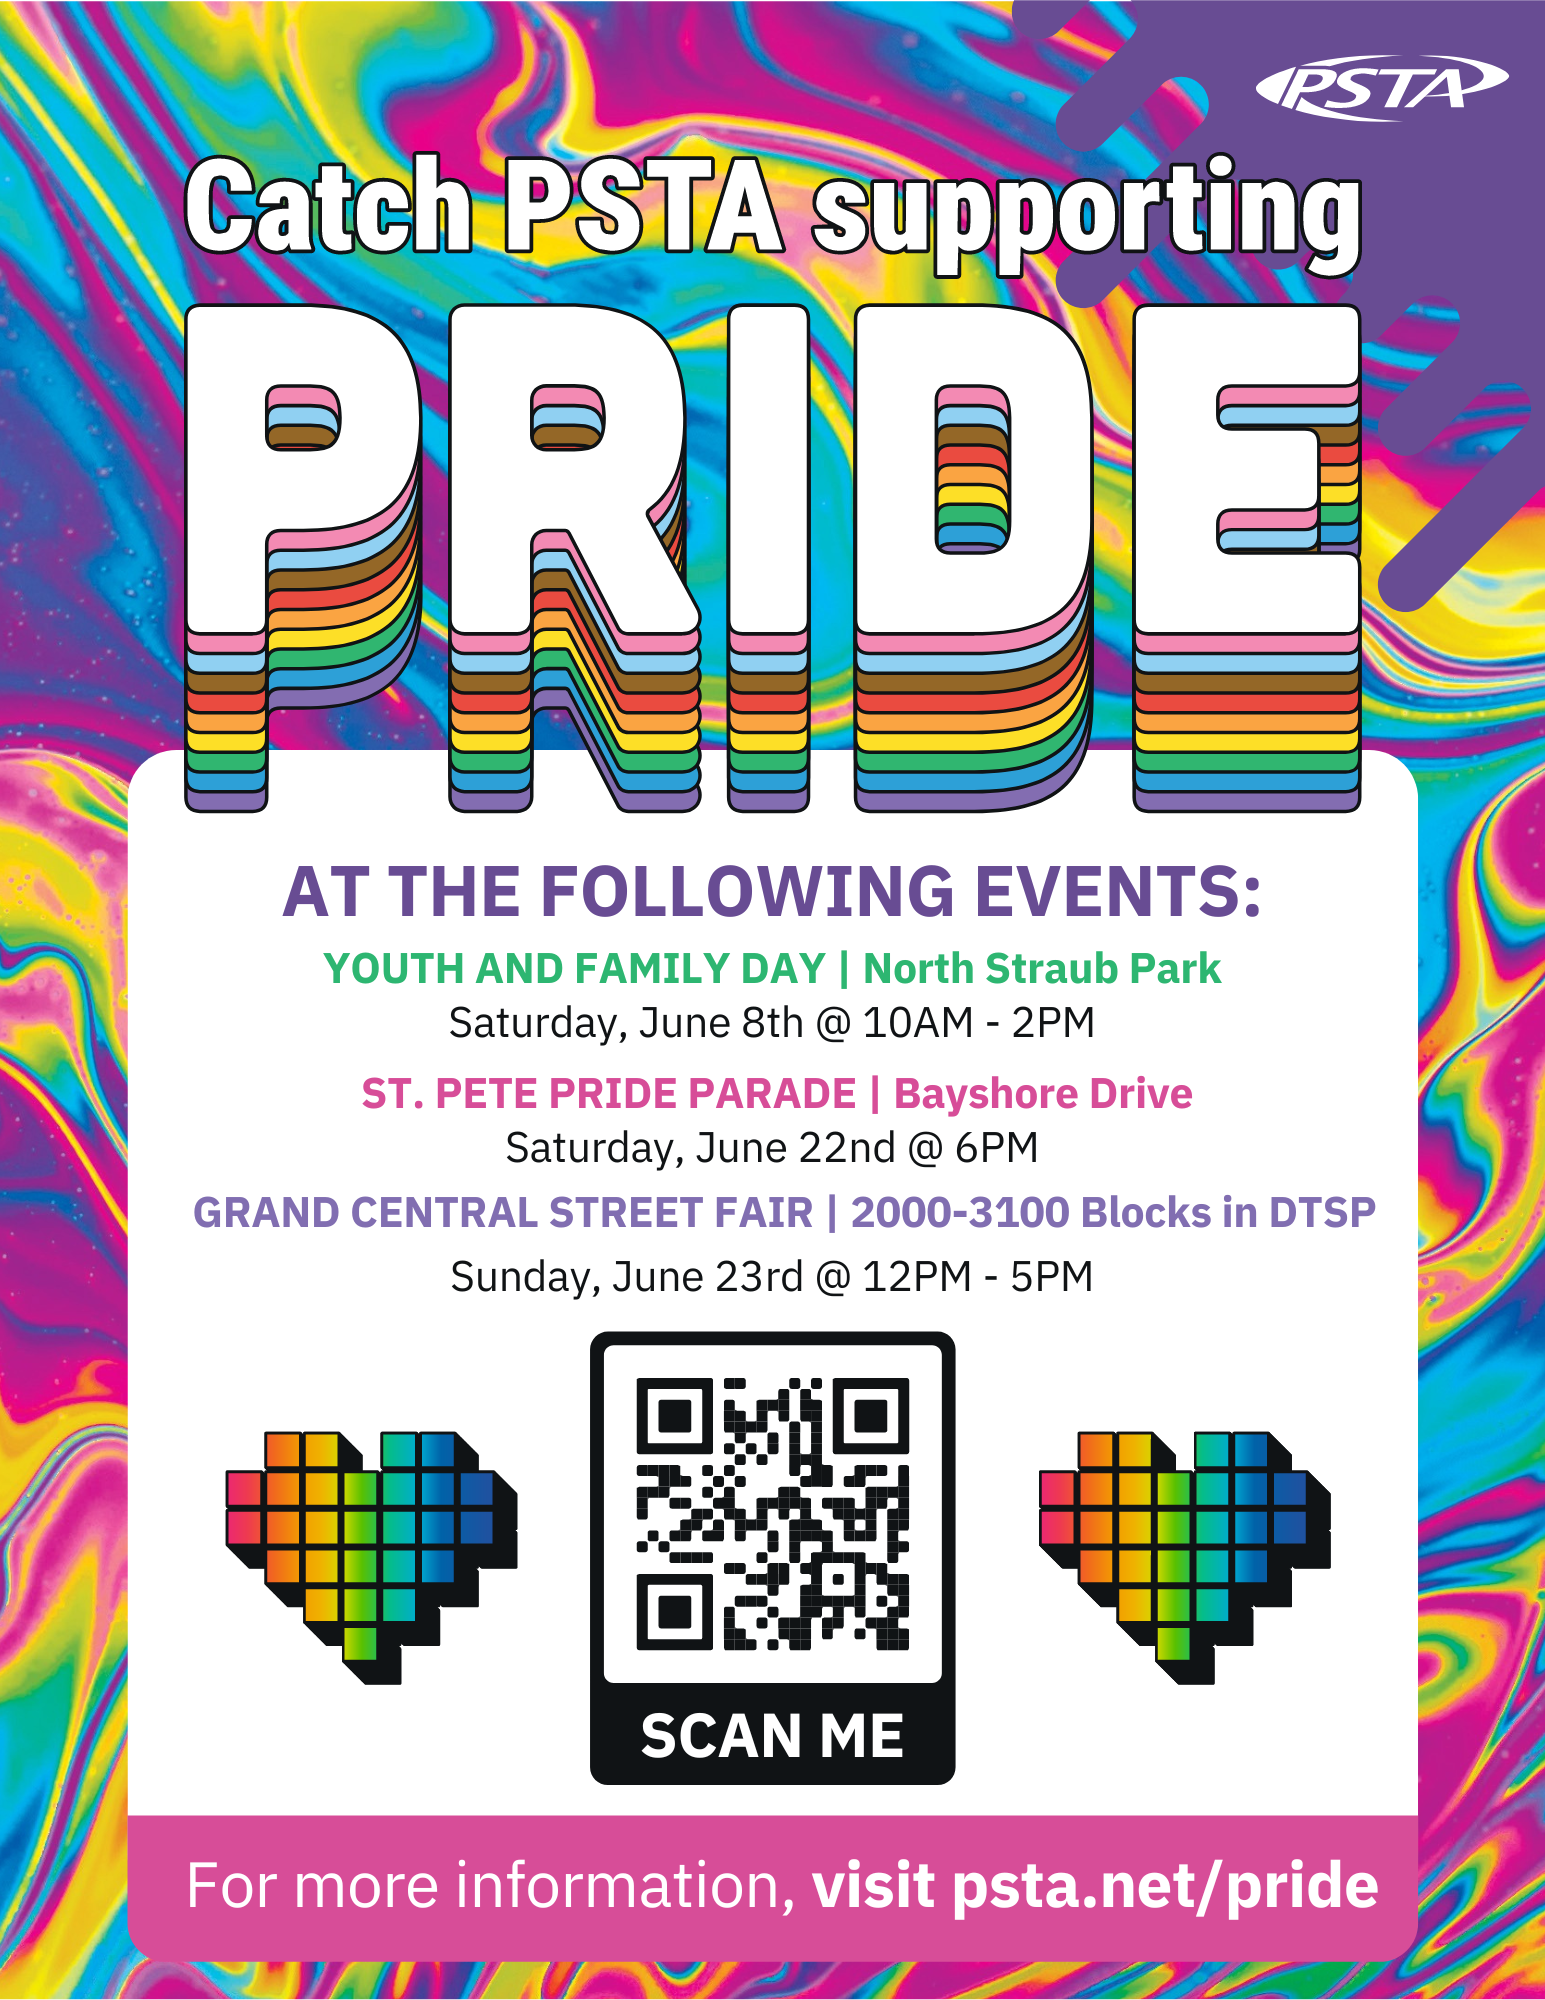 Poster showing what Pride events PSTA will attend, including Youth and Family Day on June 8th, St. Pete Pride Parade on June 22nd, and Grand Central Street Fair on June 23rd.